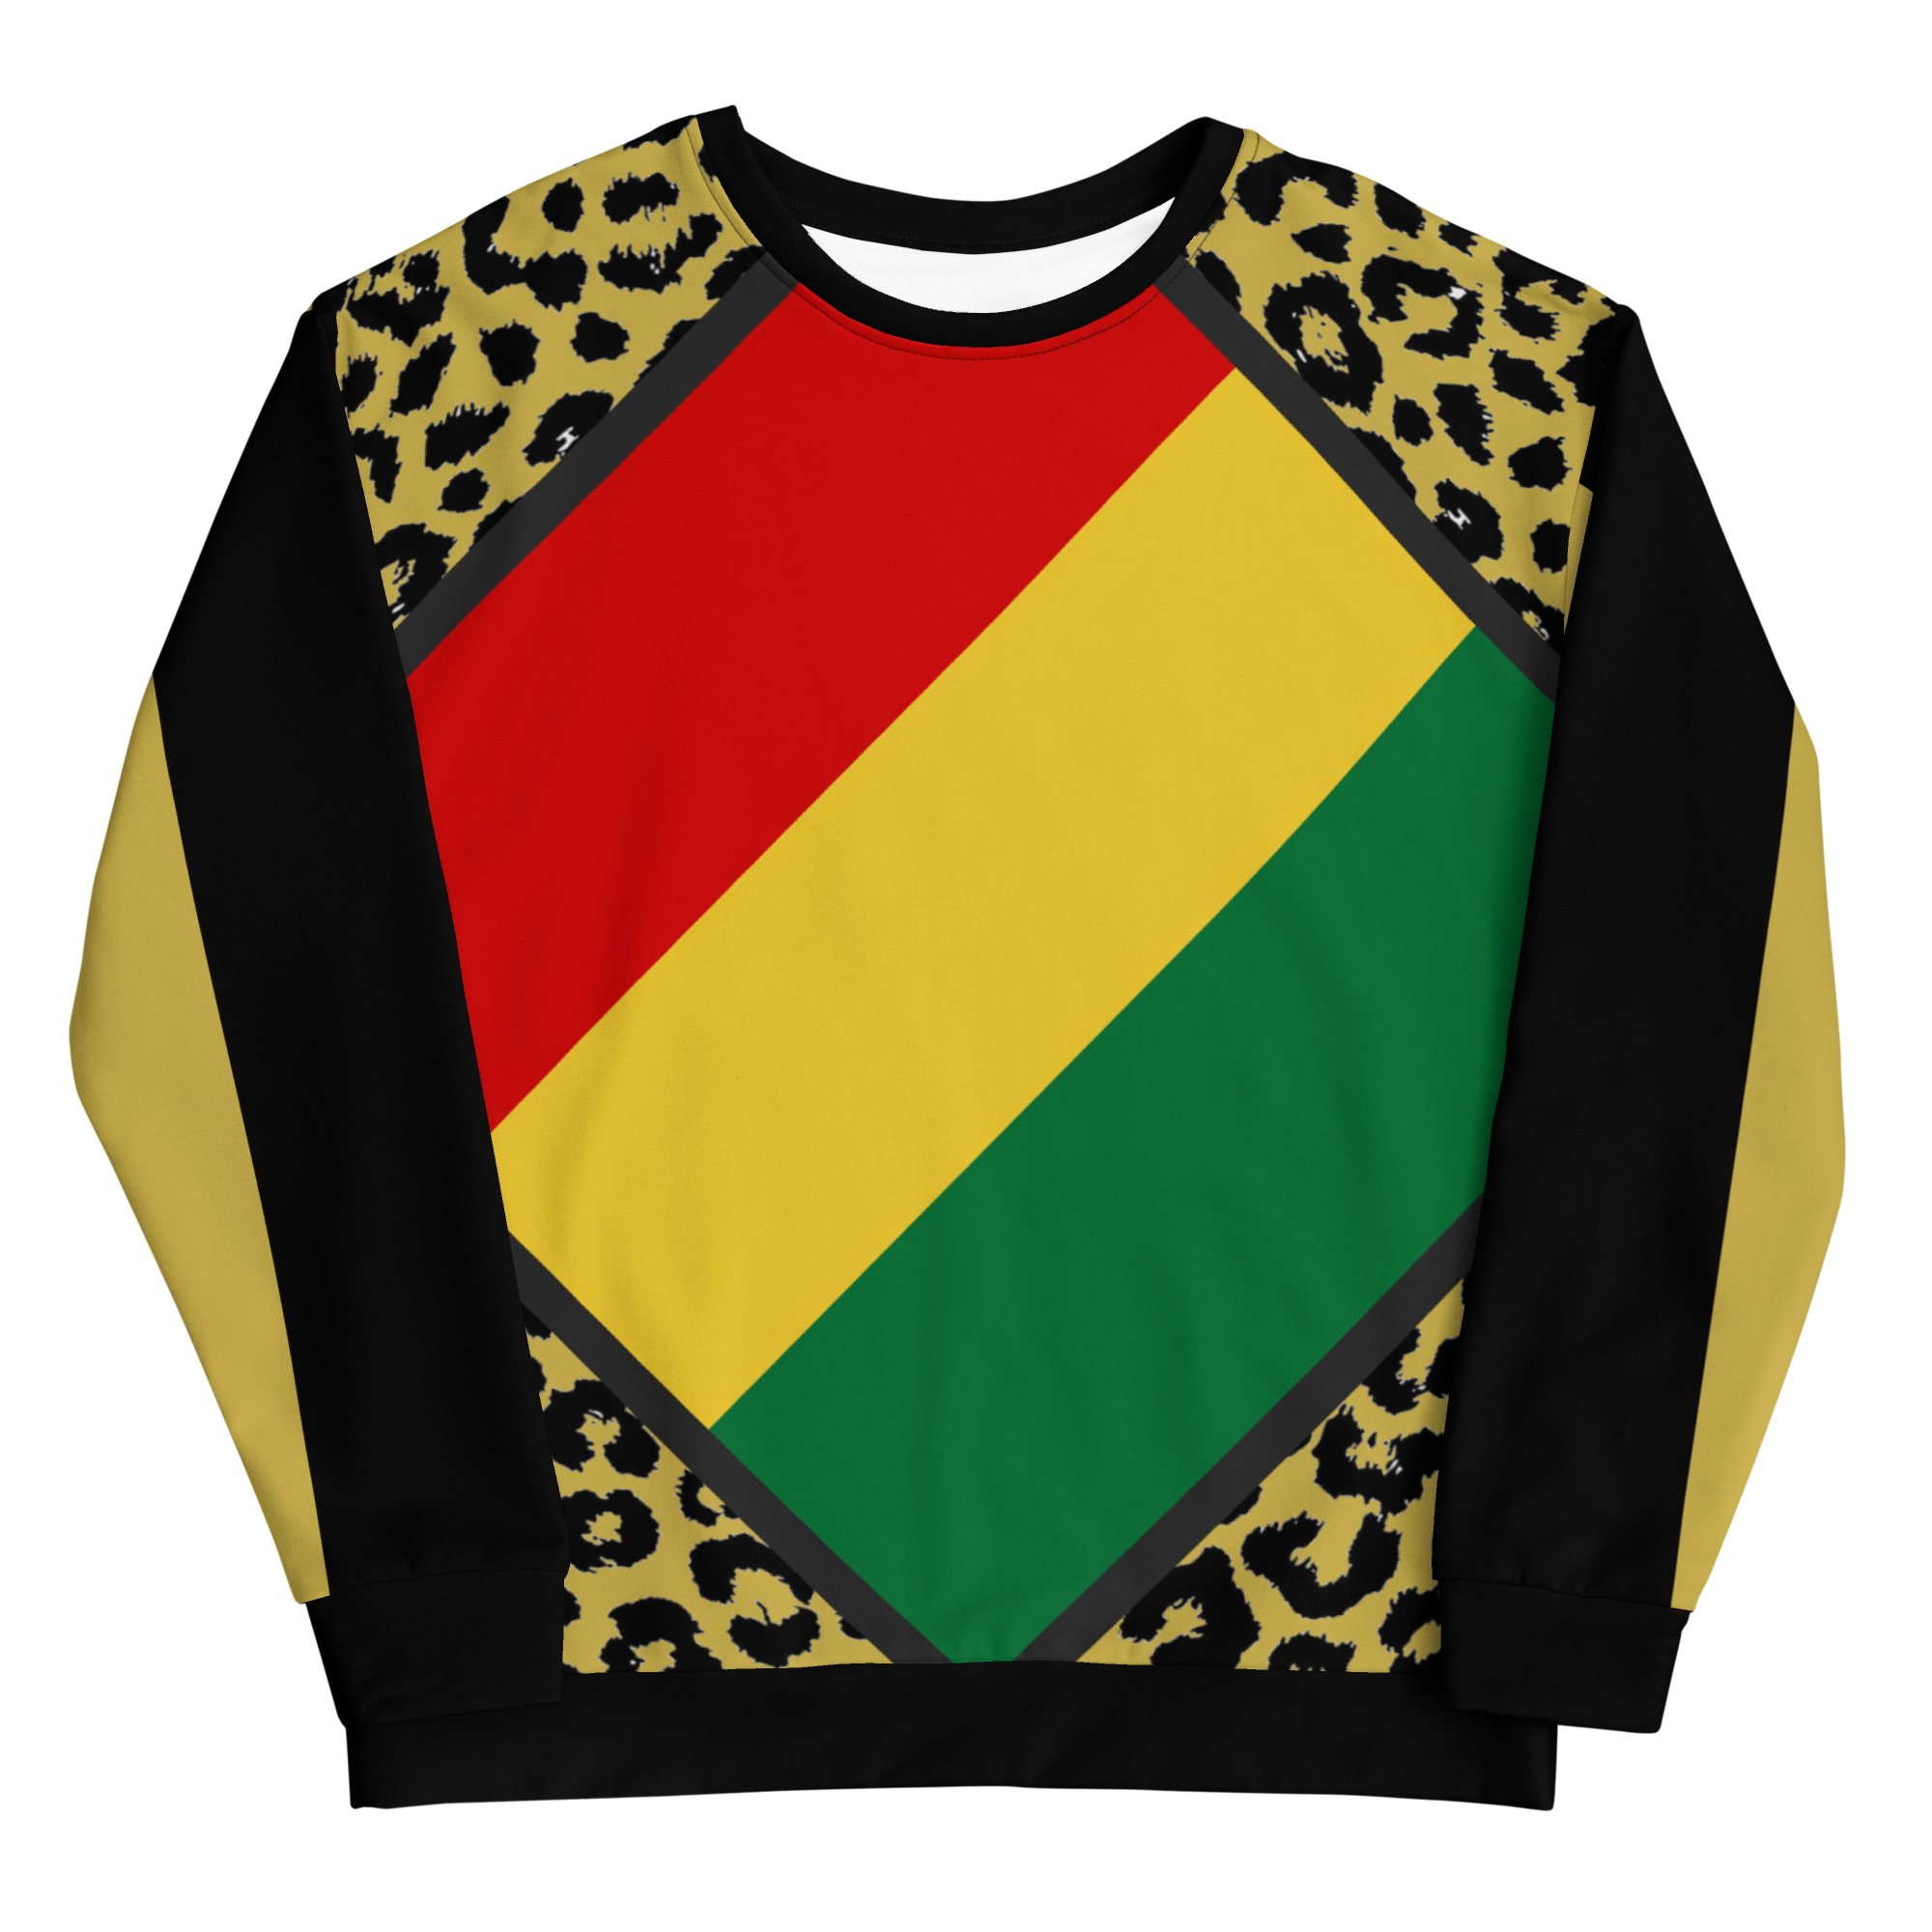  all-over printed sweatshirt with nyabinghi rasta flag and leopard print accents